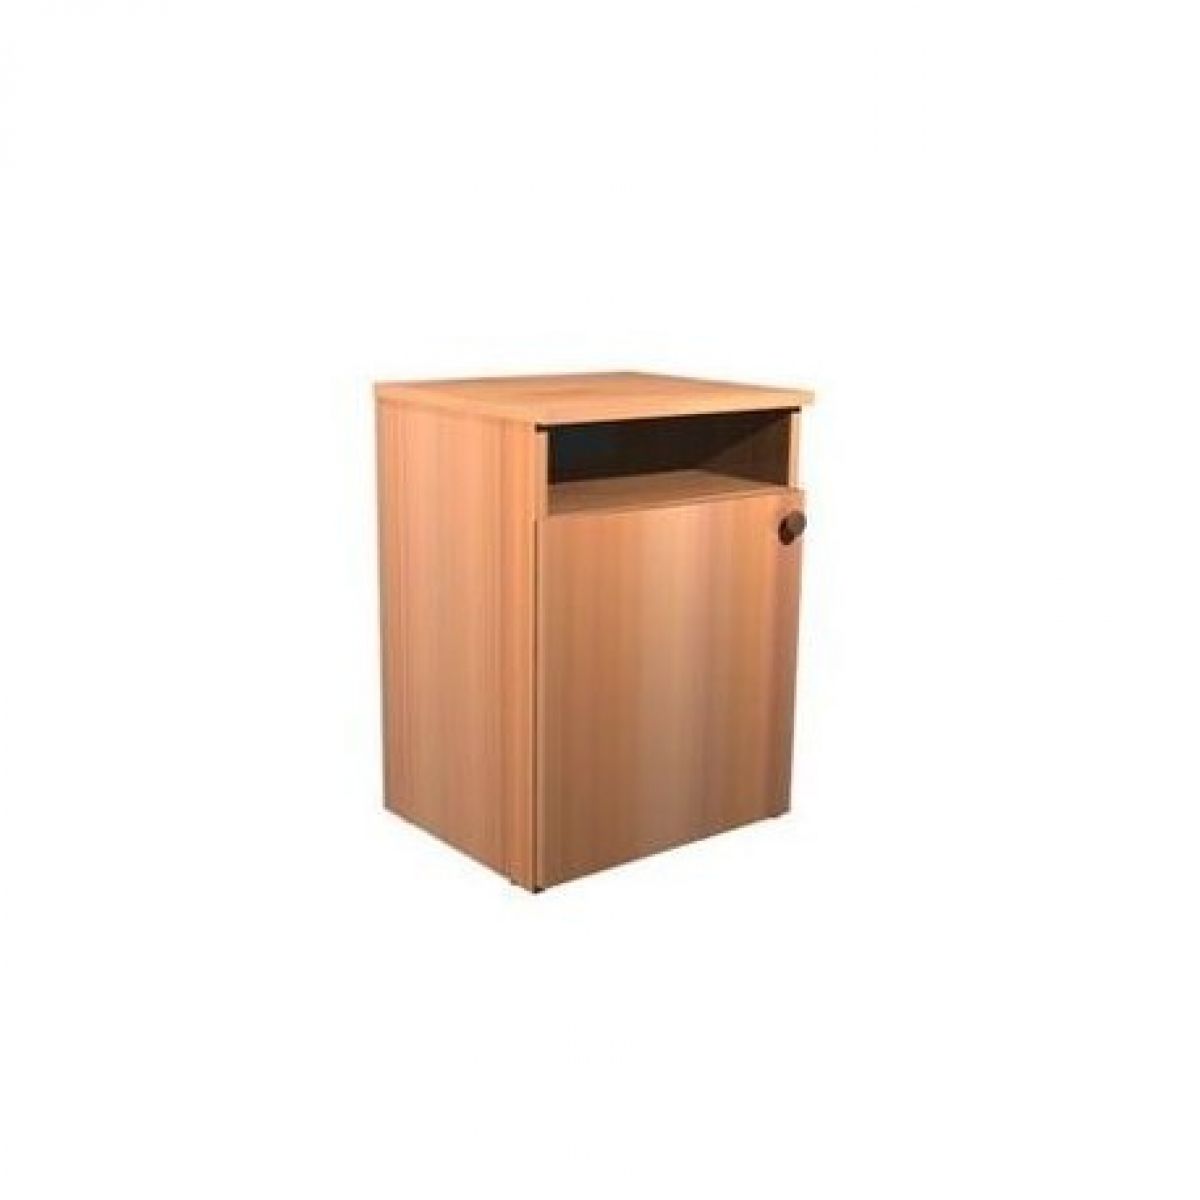 New bedside table 400*400*580 mm